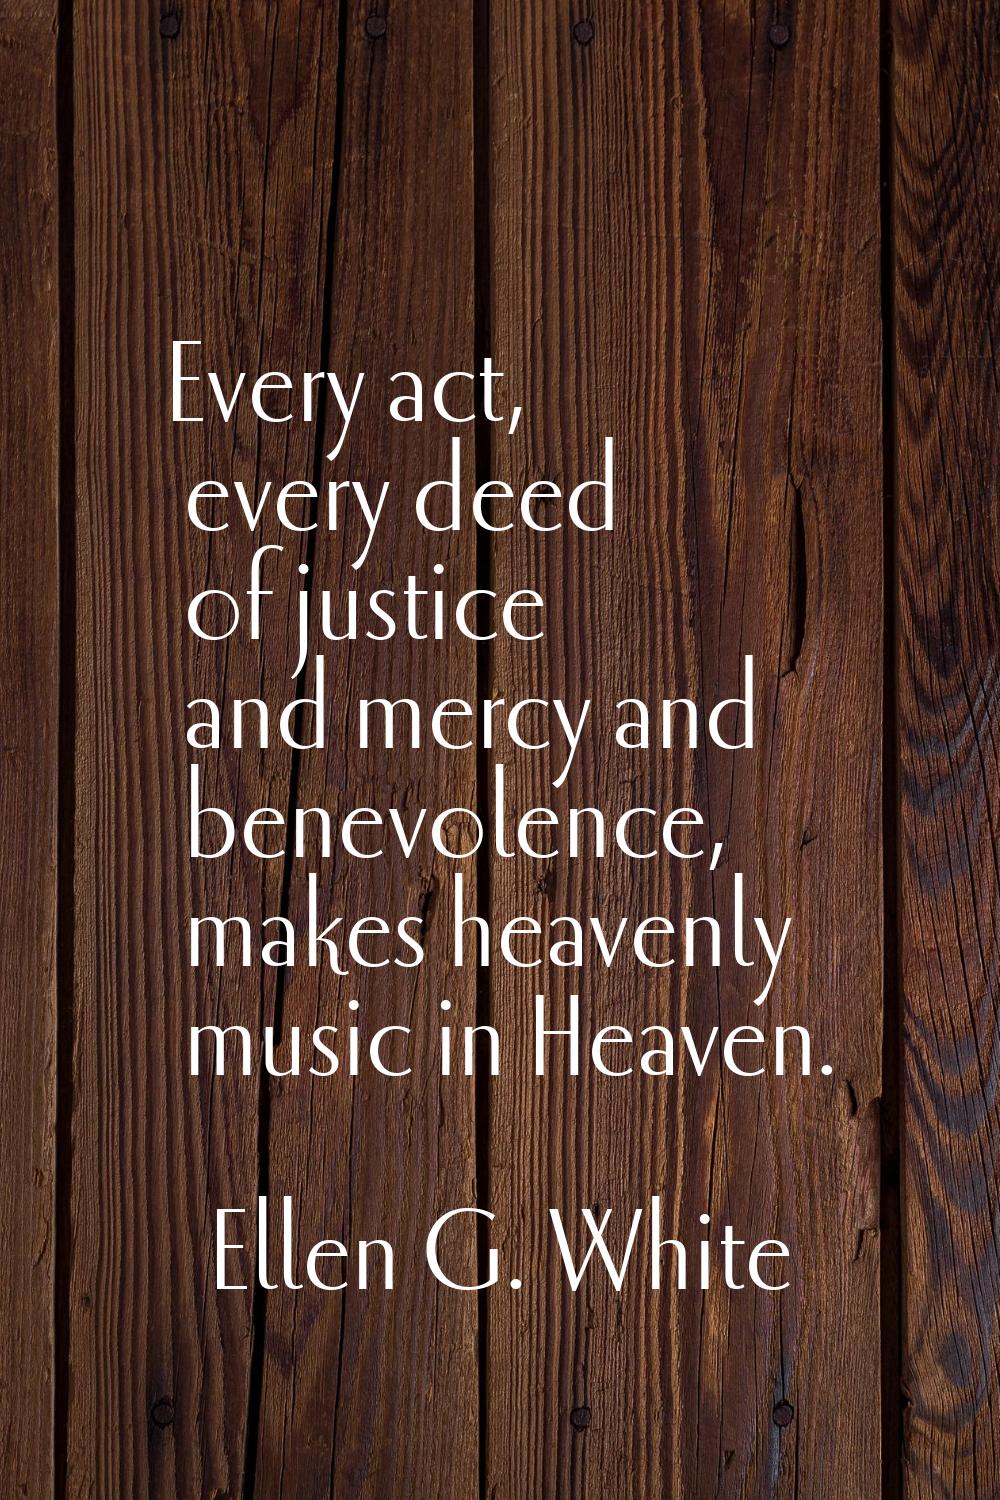 Every act, every deed of justice and mercy and benevolence, makes heavenly music in Heaven.